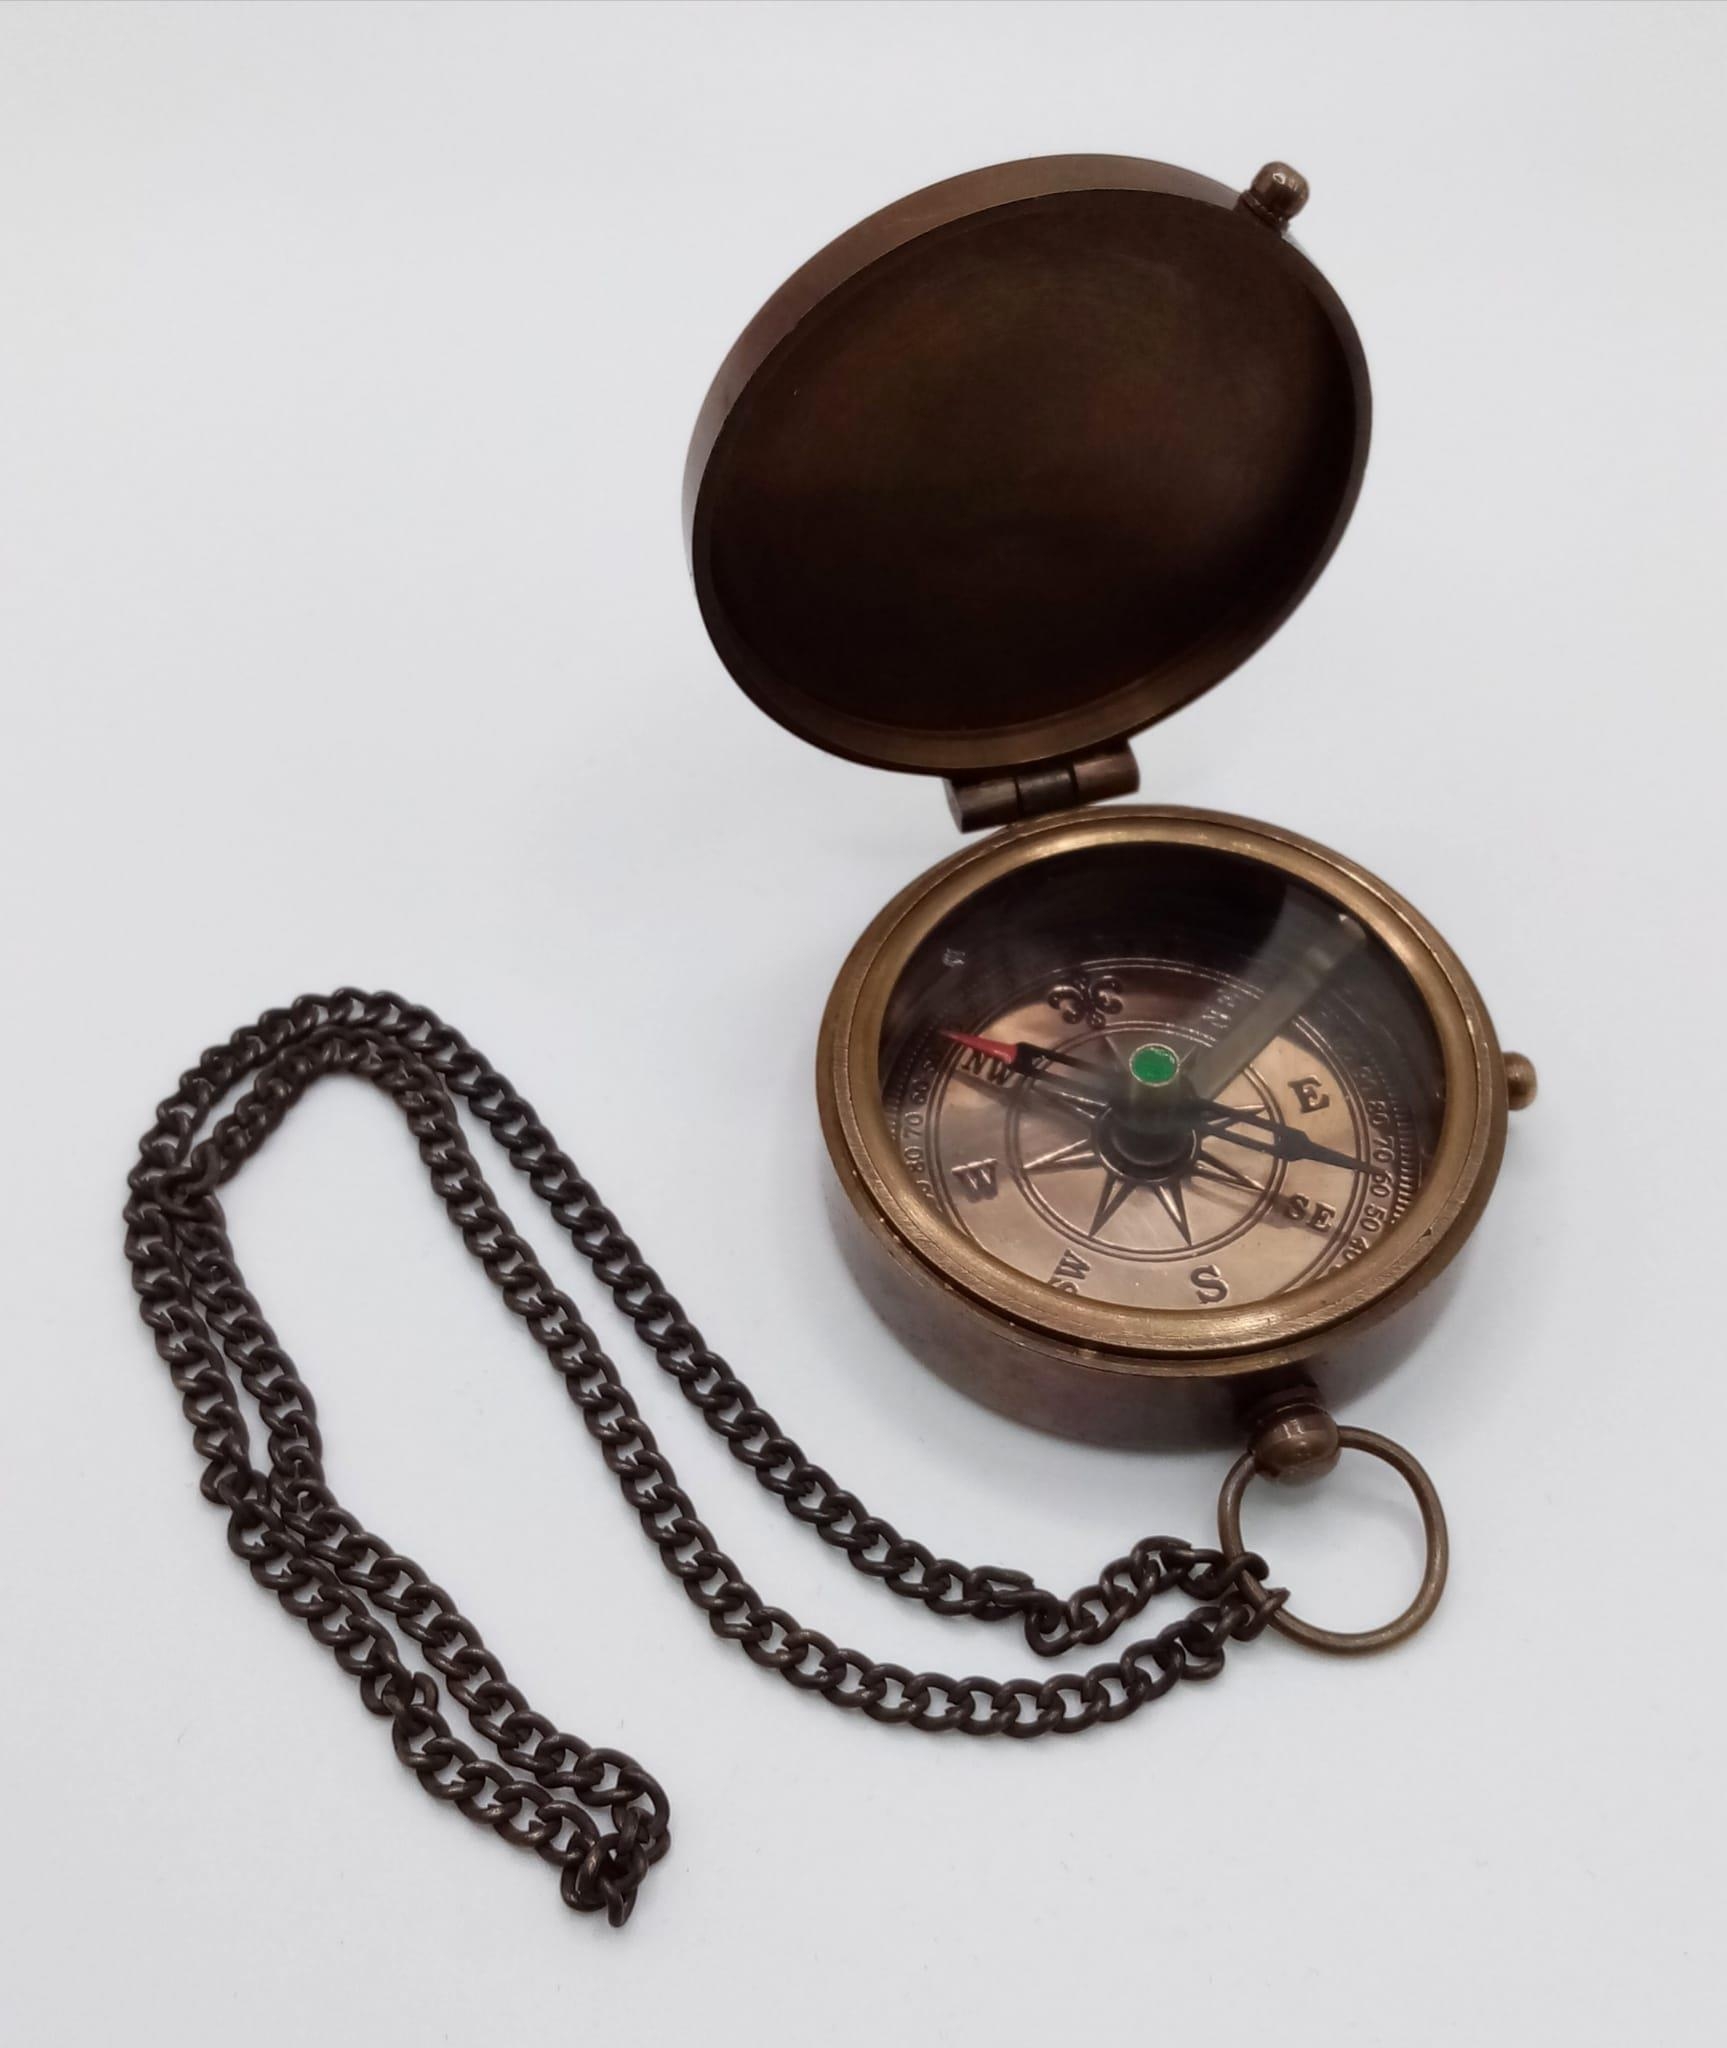 A brass compass with immobiliser, brass chain and inscription BERLIN 1936 in a wooden box with